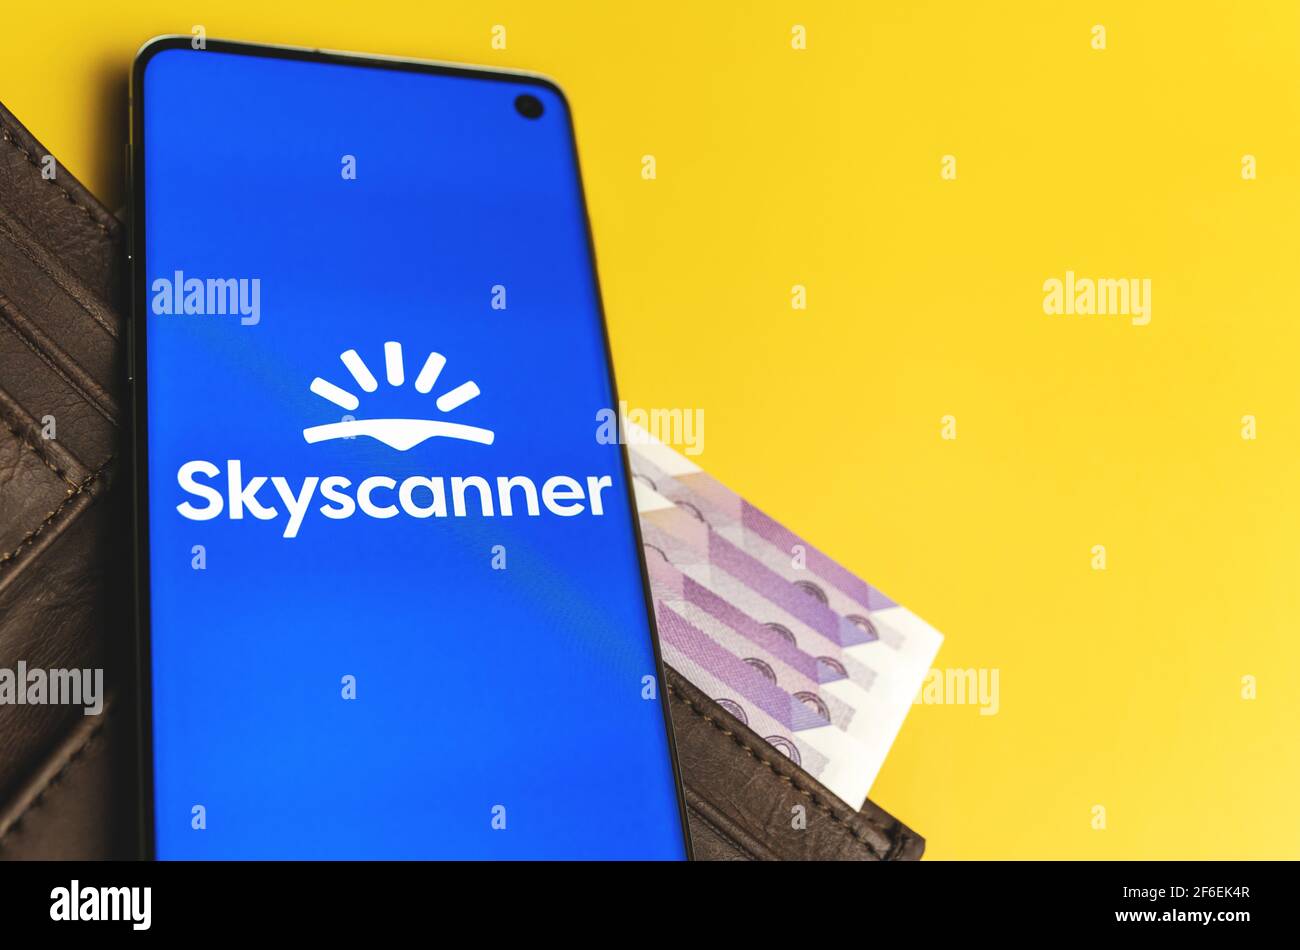 SWANSEA, UK - MARCH 28, 2021: Scyscanner app logo displayed on smartphone laying on brown wallet with money on yellow background Stock Photo